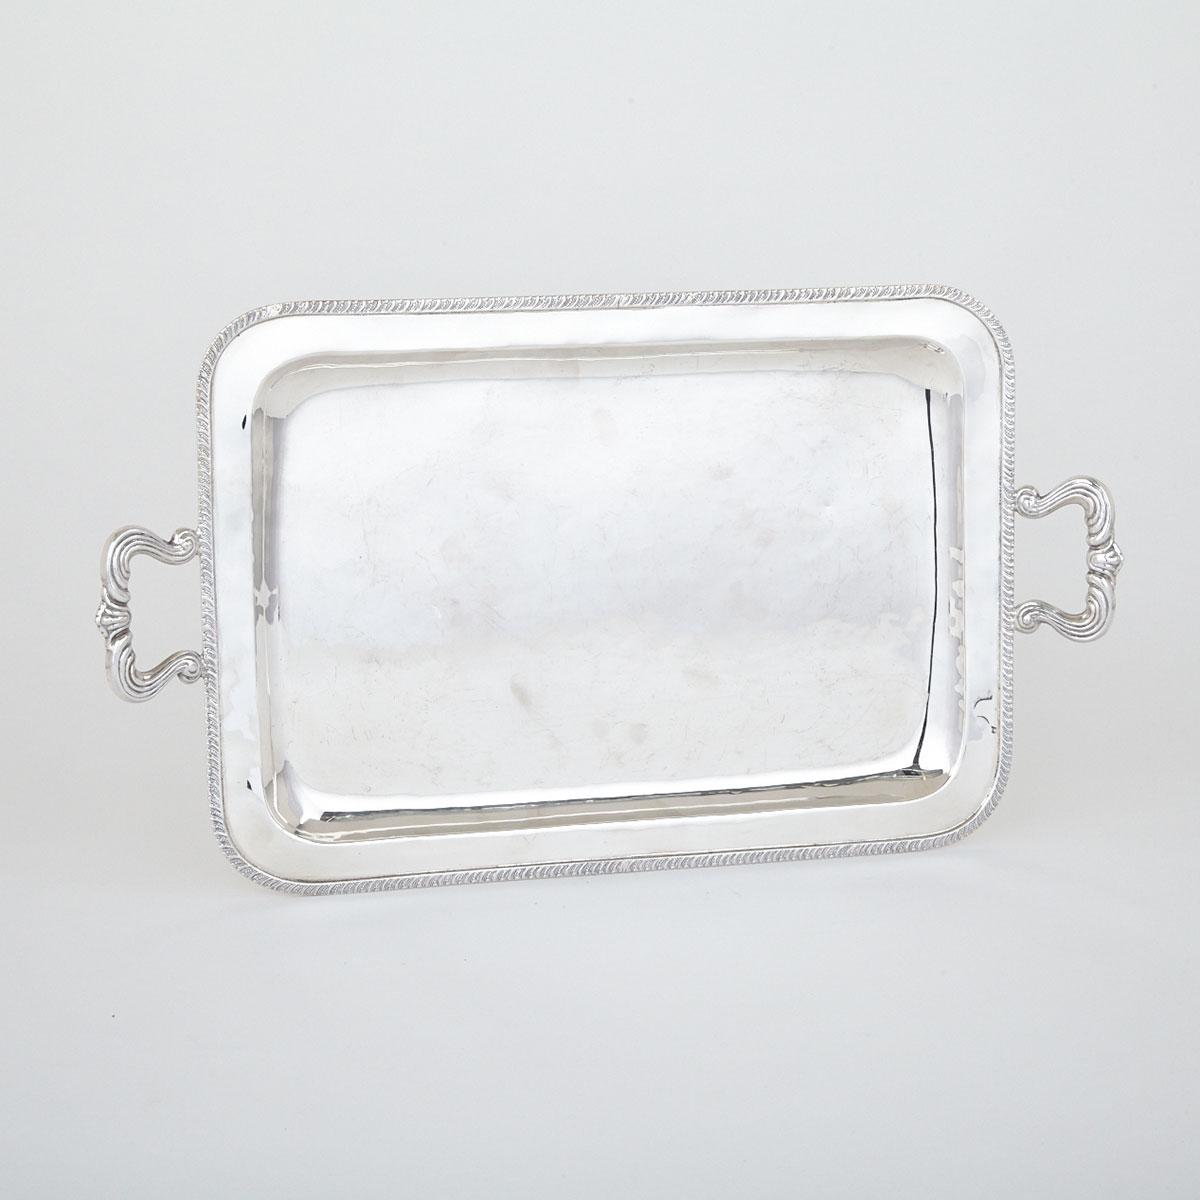 Peruvian Silver Two-Handled Serving Tray, 20th century